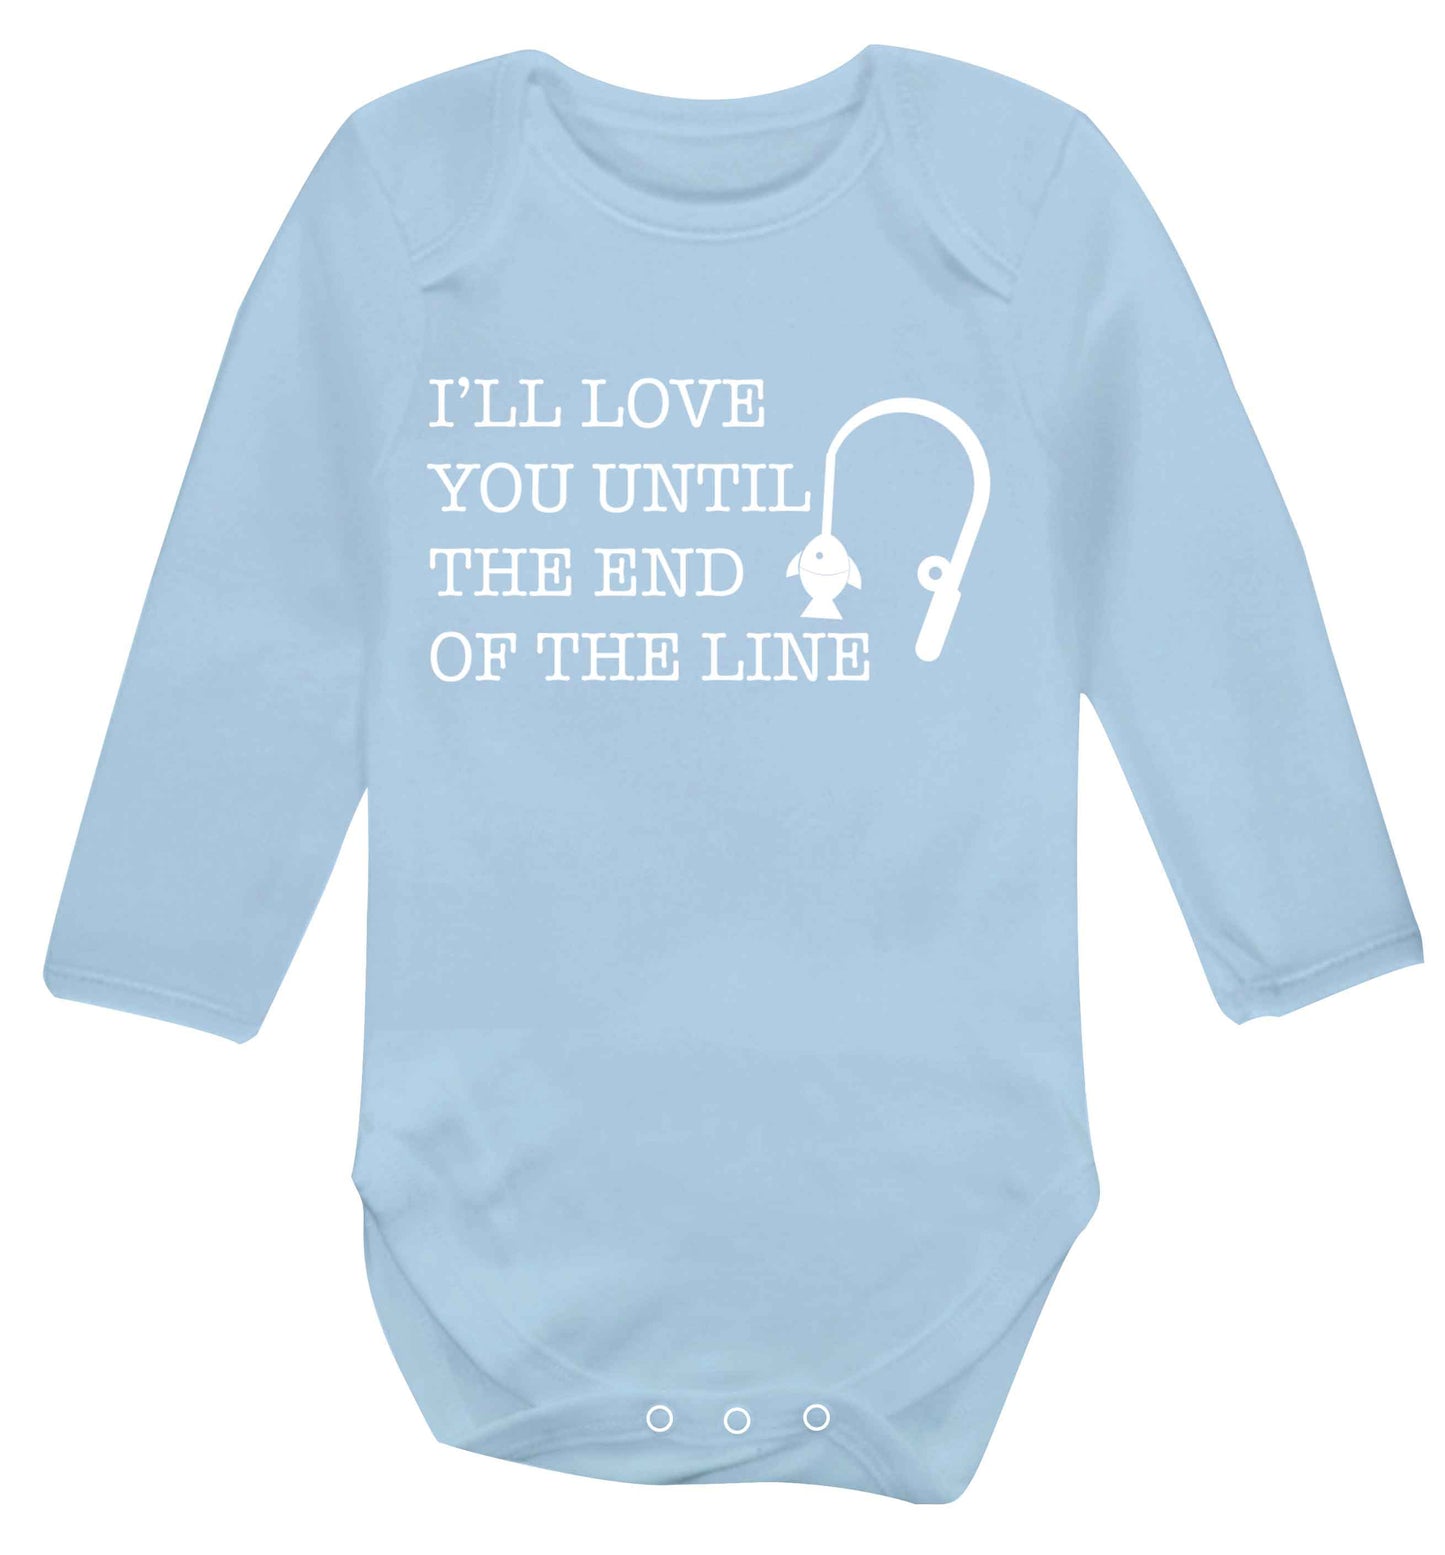 I'll love you until the end of the line Baby Vest long sleeved pale blue 6-12 months